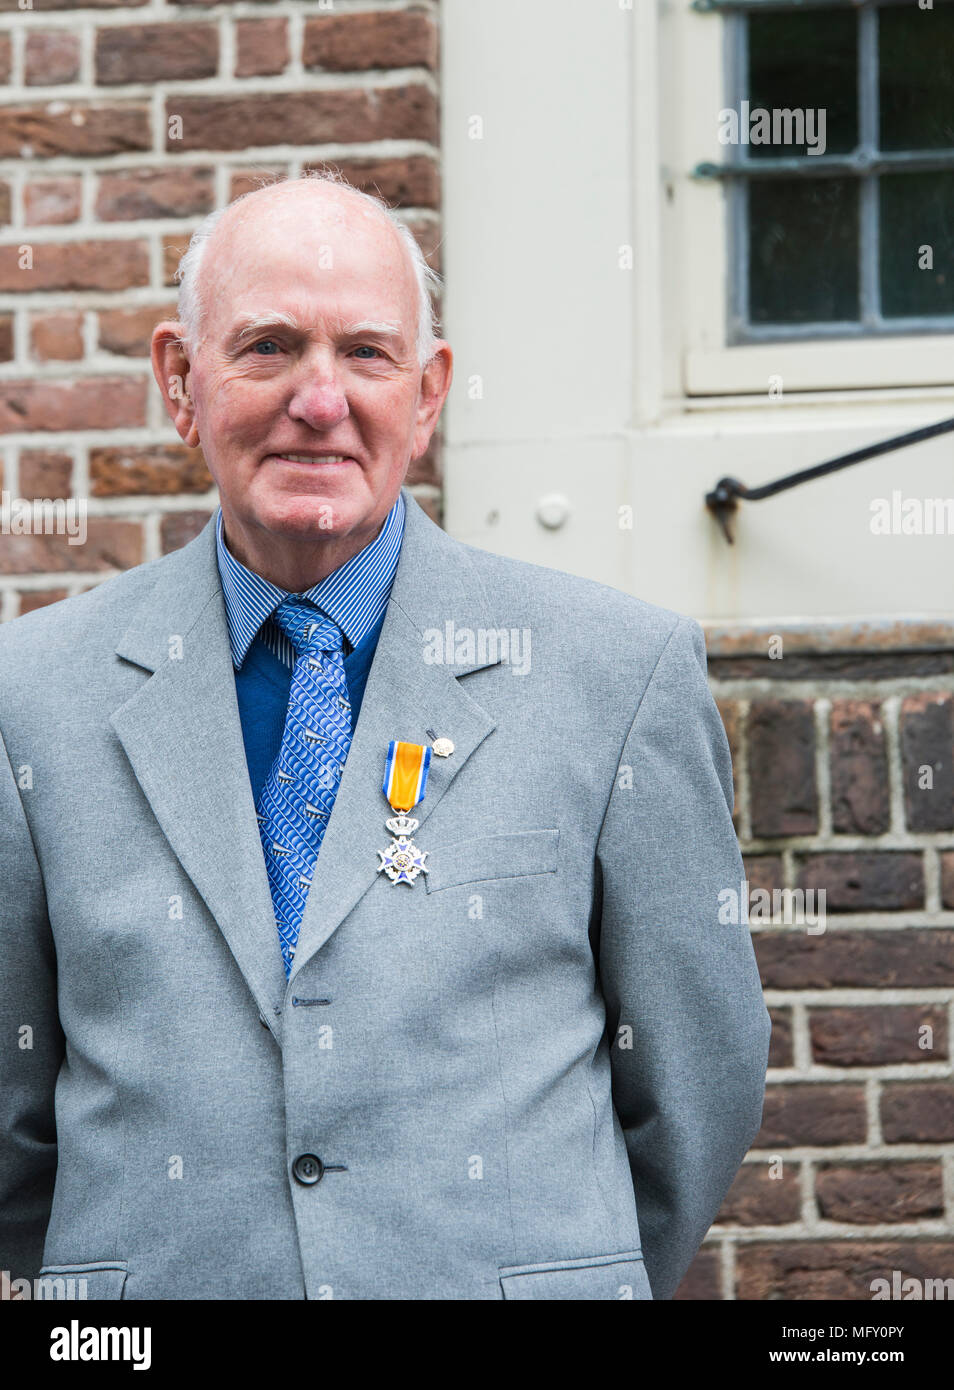 Hellevoetlsuis,Holland,27-April-2018: Mister Slavenburg with his decoration on the Order of ORange-Nassau,The National orders are granted based on recommendations from government commissions are given by the king on kingsday Credit: chris willemsen/Alamy Live News Stock Photo